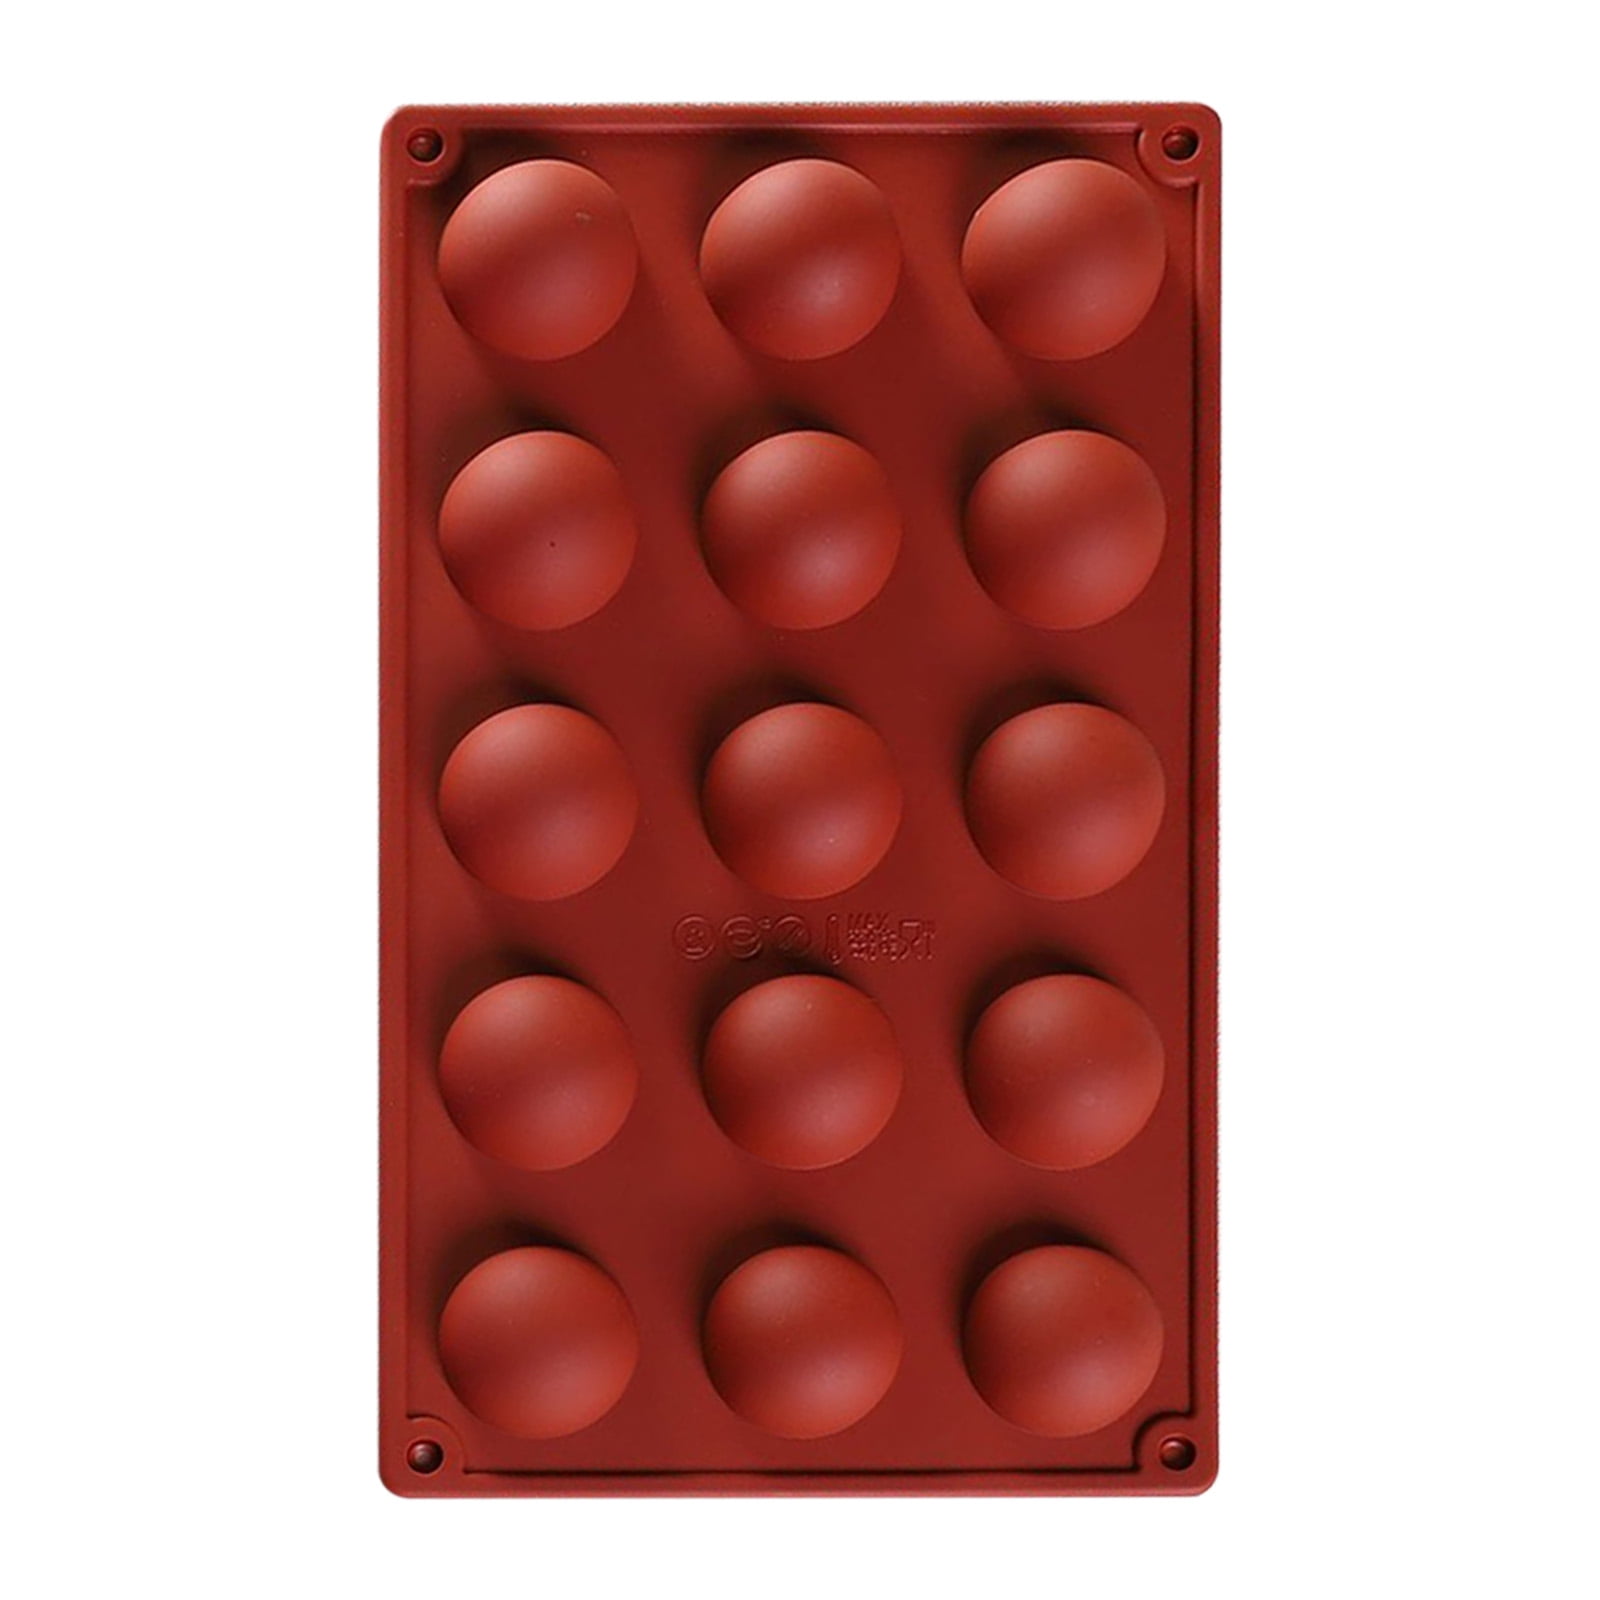 Pudding Jelly Red Silicone Baking Mold 2Packs,12-Cavity Non-stick Cylinder Cupcake Molds Silicone Tray for Mousse Handmade Soap Bread 